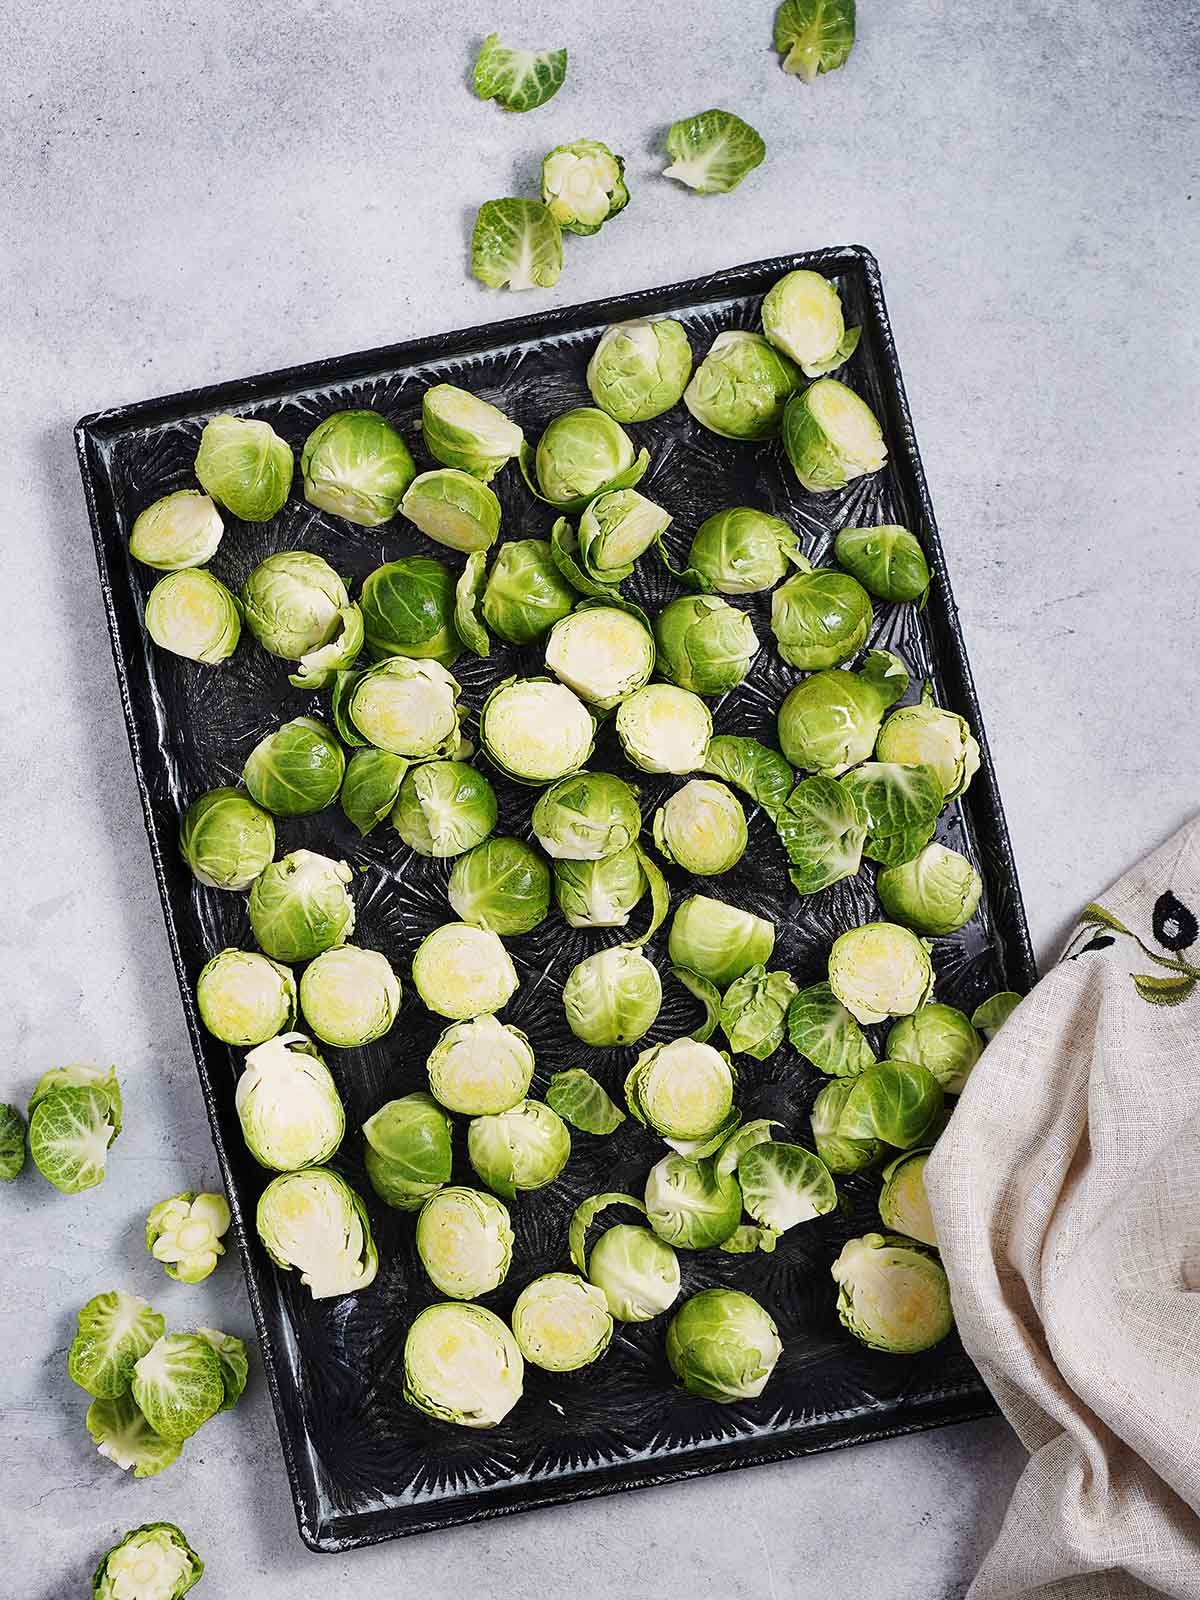 A baking tray with brussel sprouts cut in half.